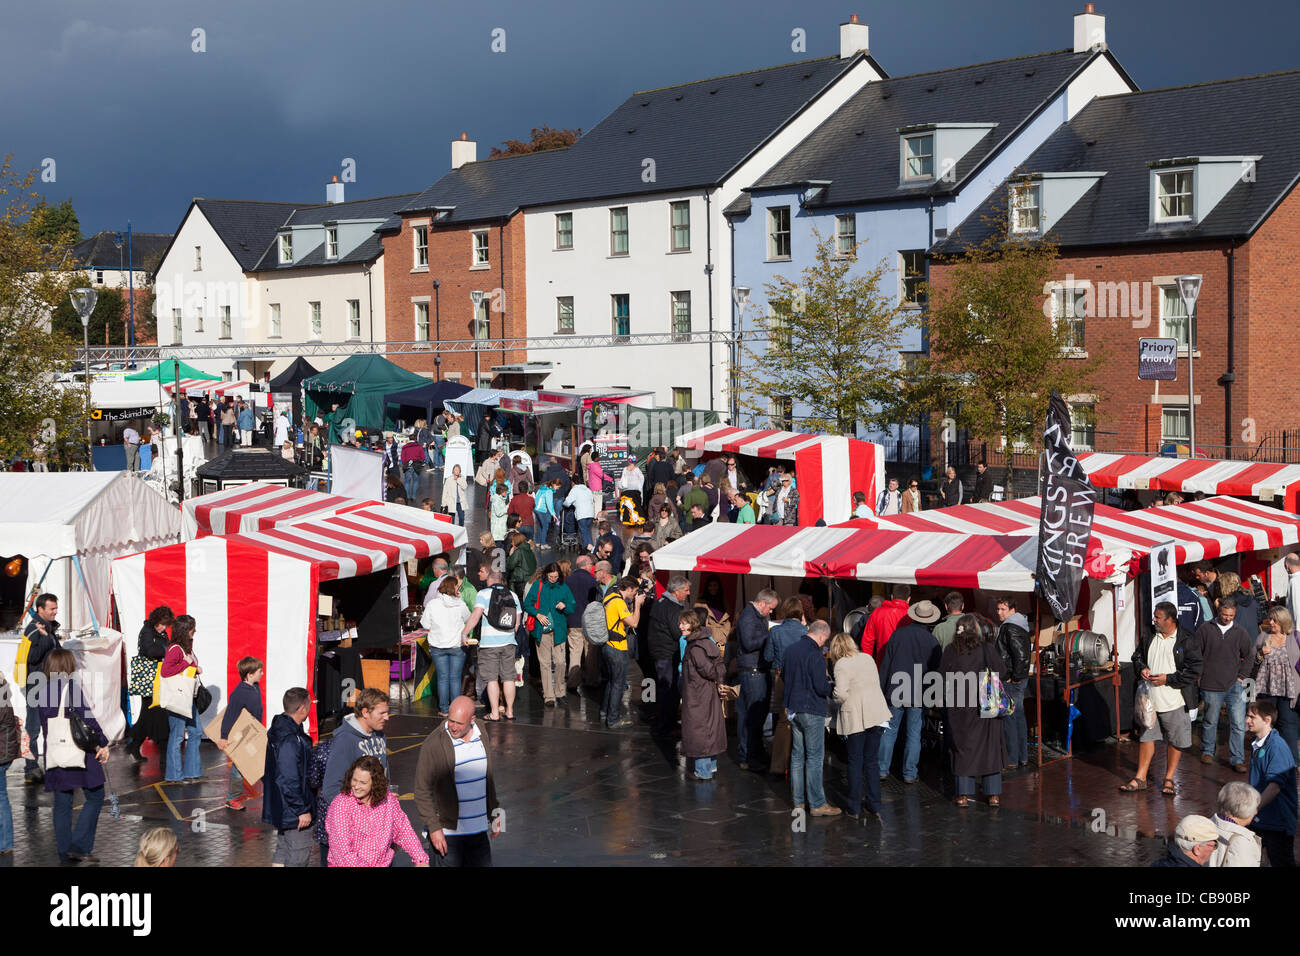 Market stalls at Abergavenny Food Festival after rain Wales UK showing how weather can affect an event Stock Photo